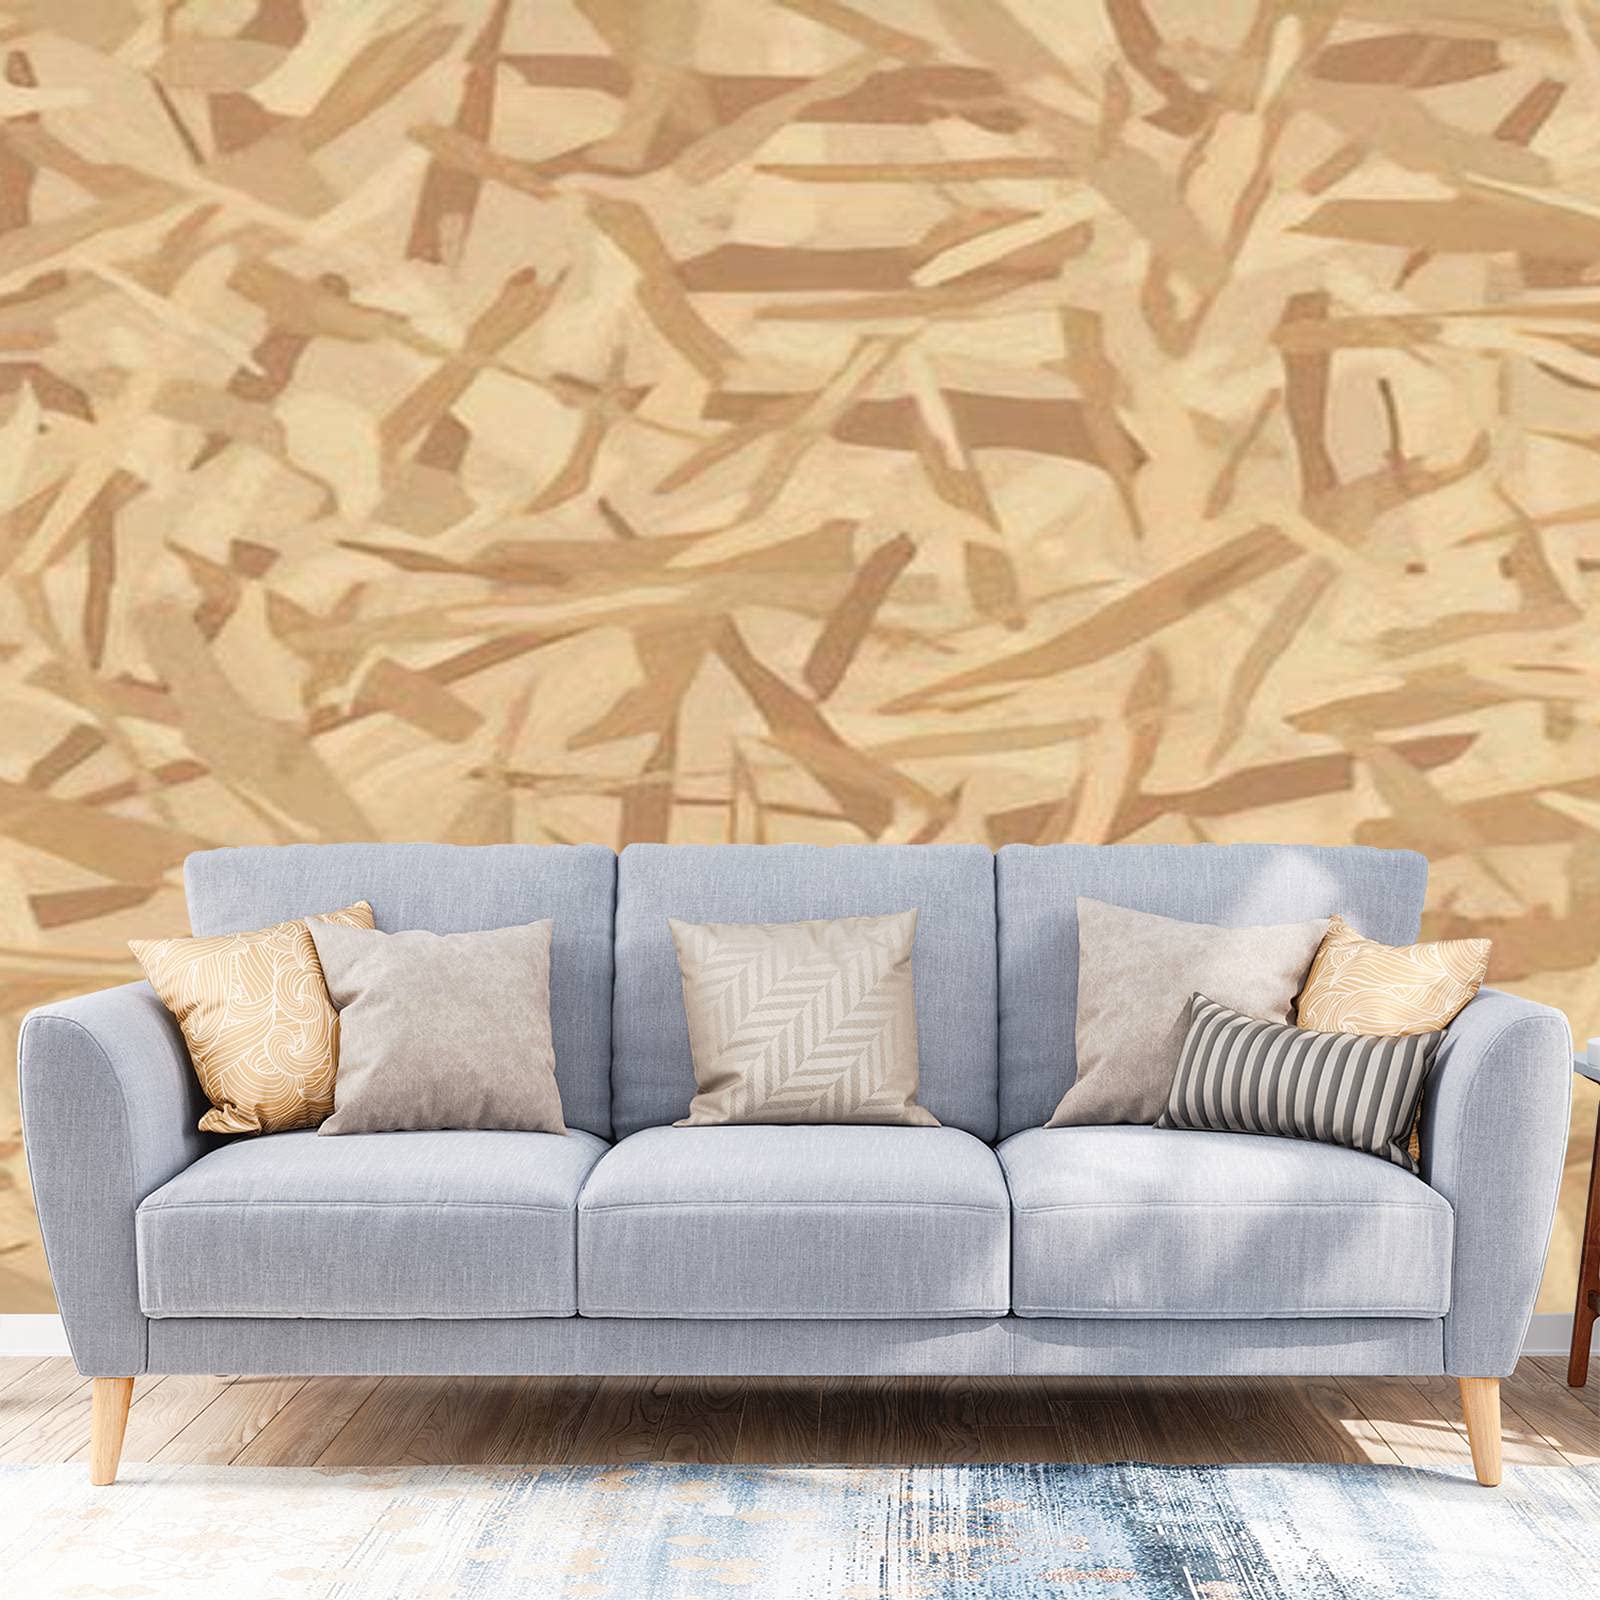 Wallpaper peel and stick oriented particle board osb wood texture lumber pattern sheet of large wall mural removable sticker vinyl film covering self adhesive decoration for living room